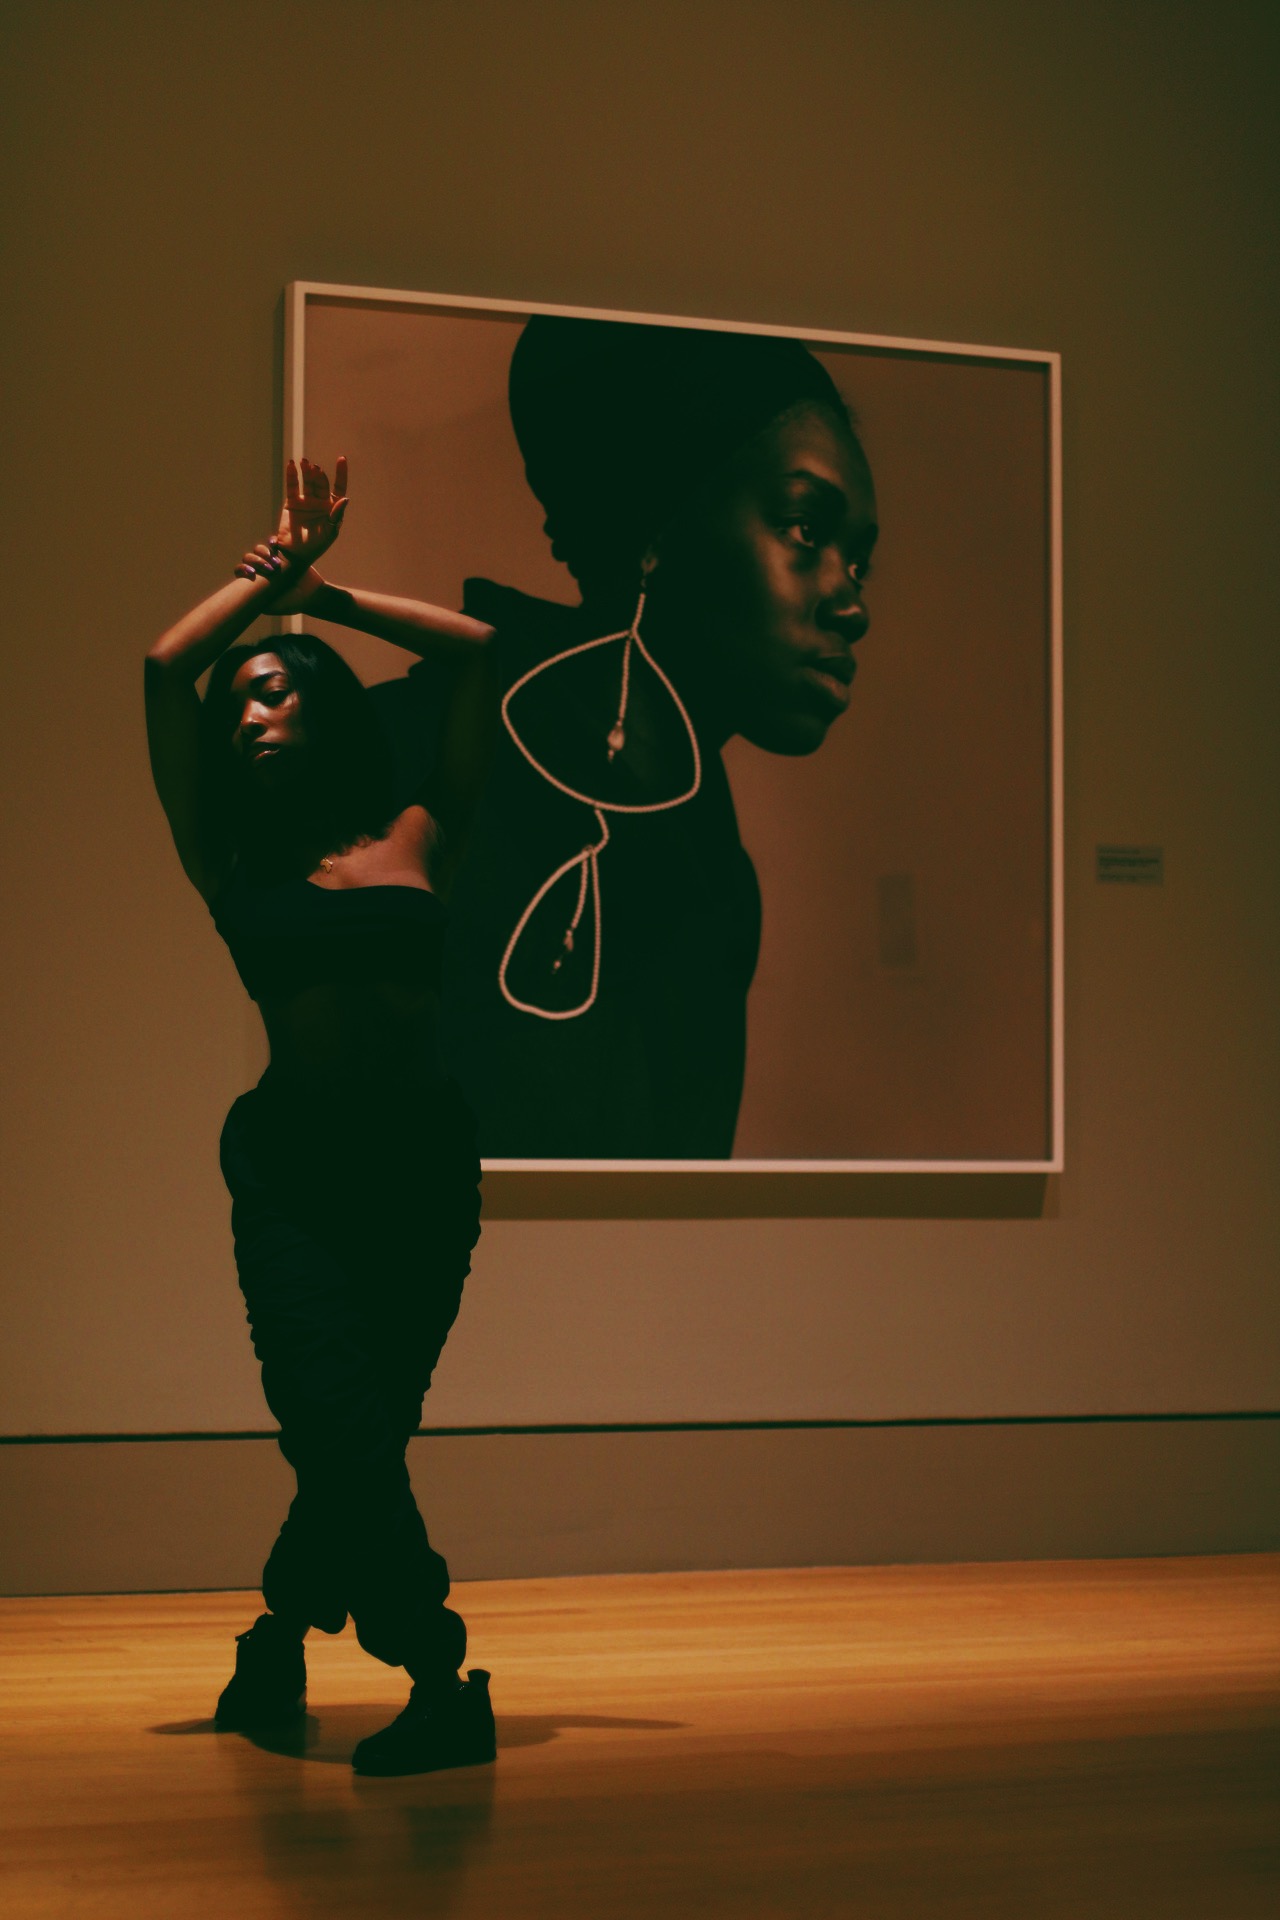 Female figure with arms raised posing in front of Kwame Brathwaite photograph